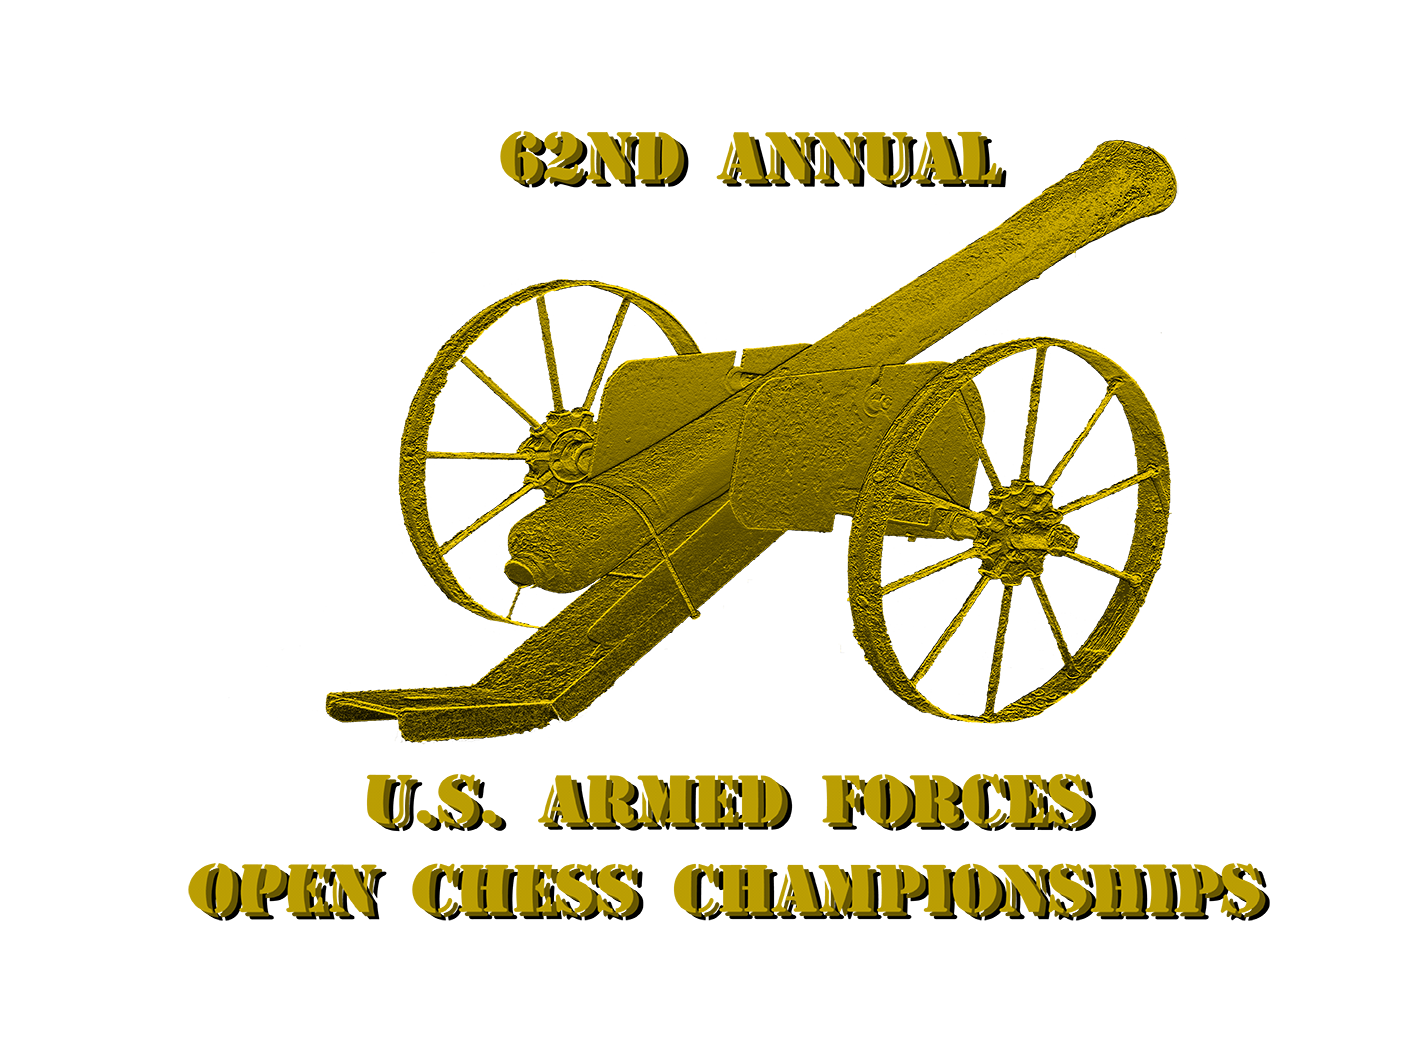 Logo for 62nd US Annual US Armed Forces Open Chess Championship in Grapevine, Texas